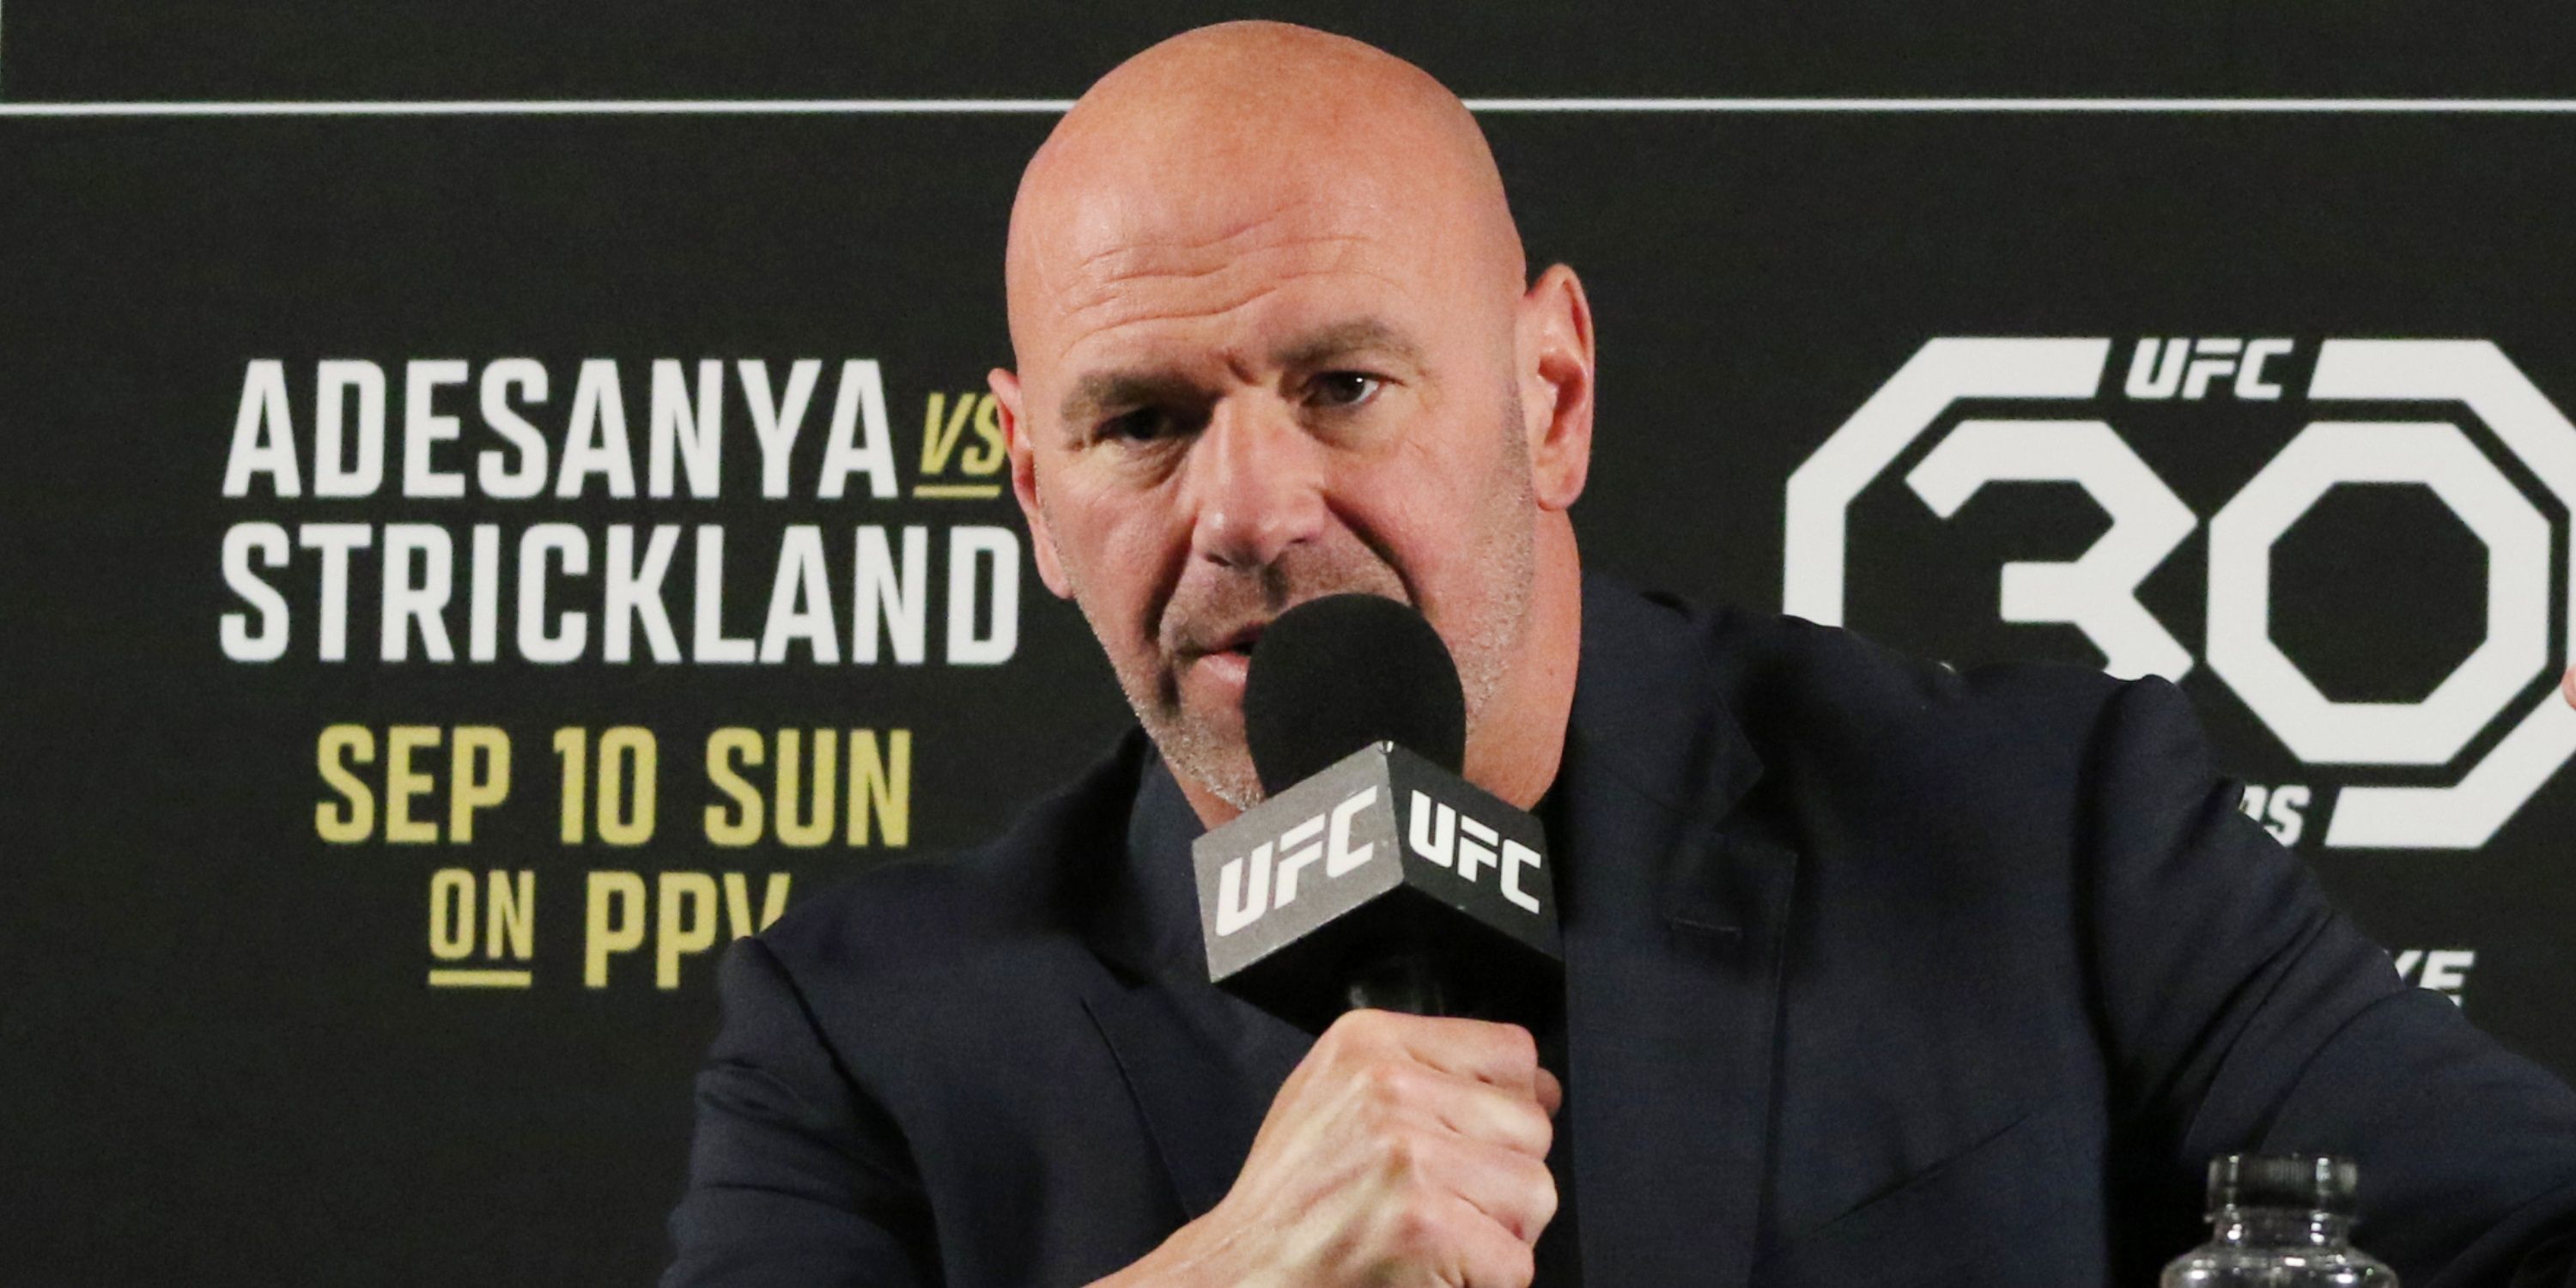 Dana White during UFC press conference